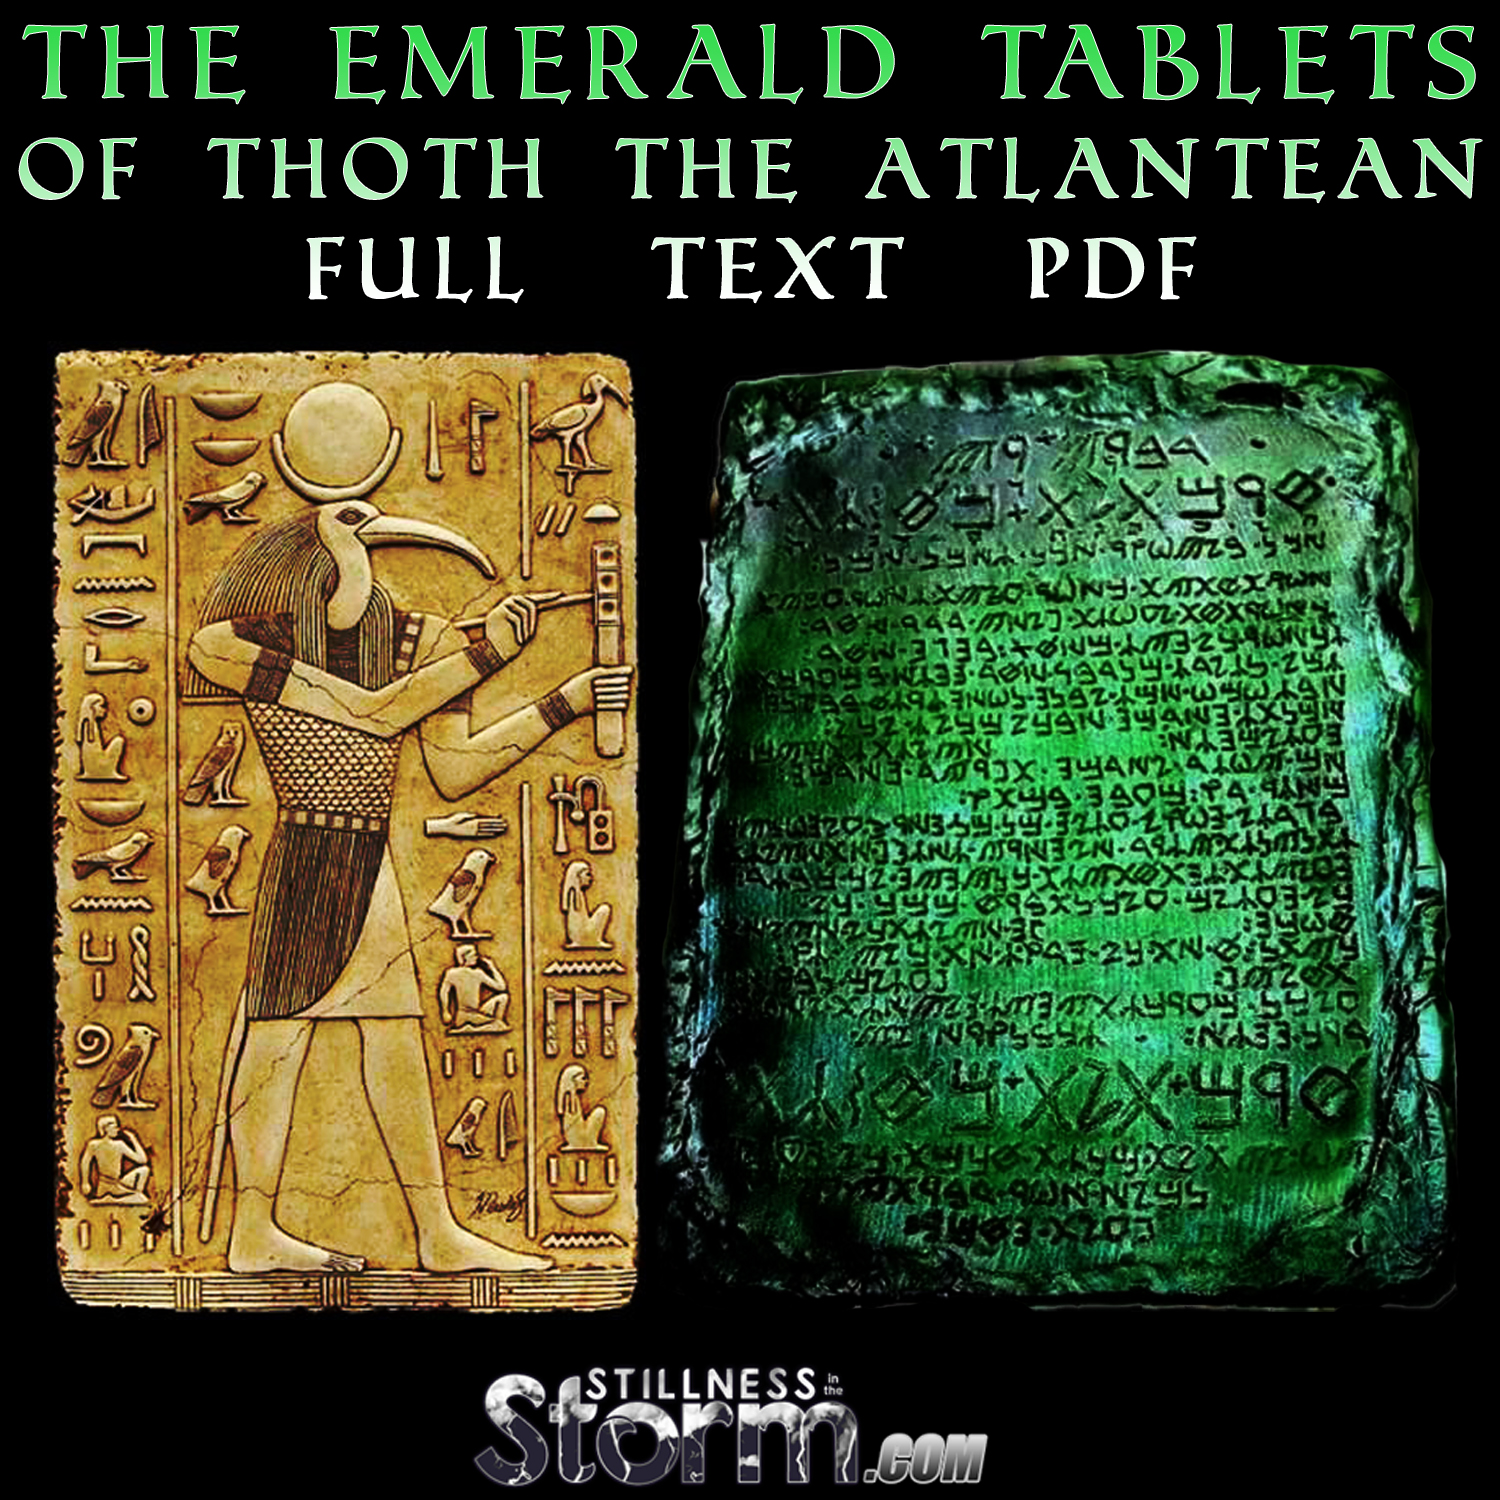 The+Emerald+Tablets+of+Thoth+the+Atlante